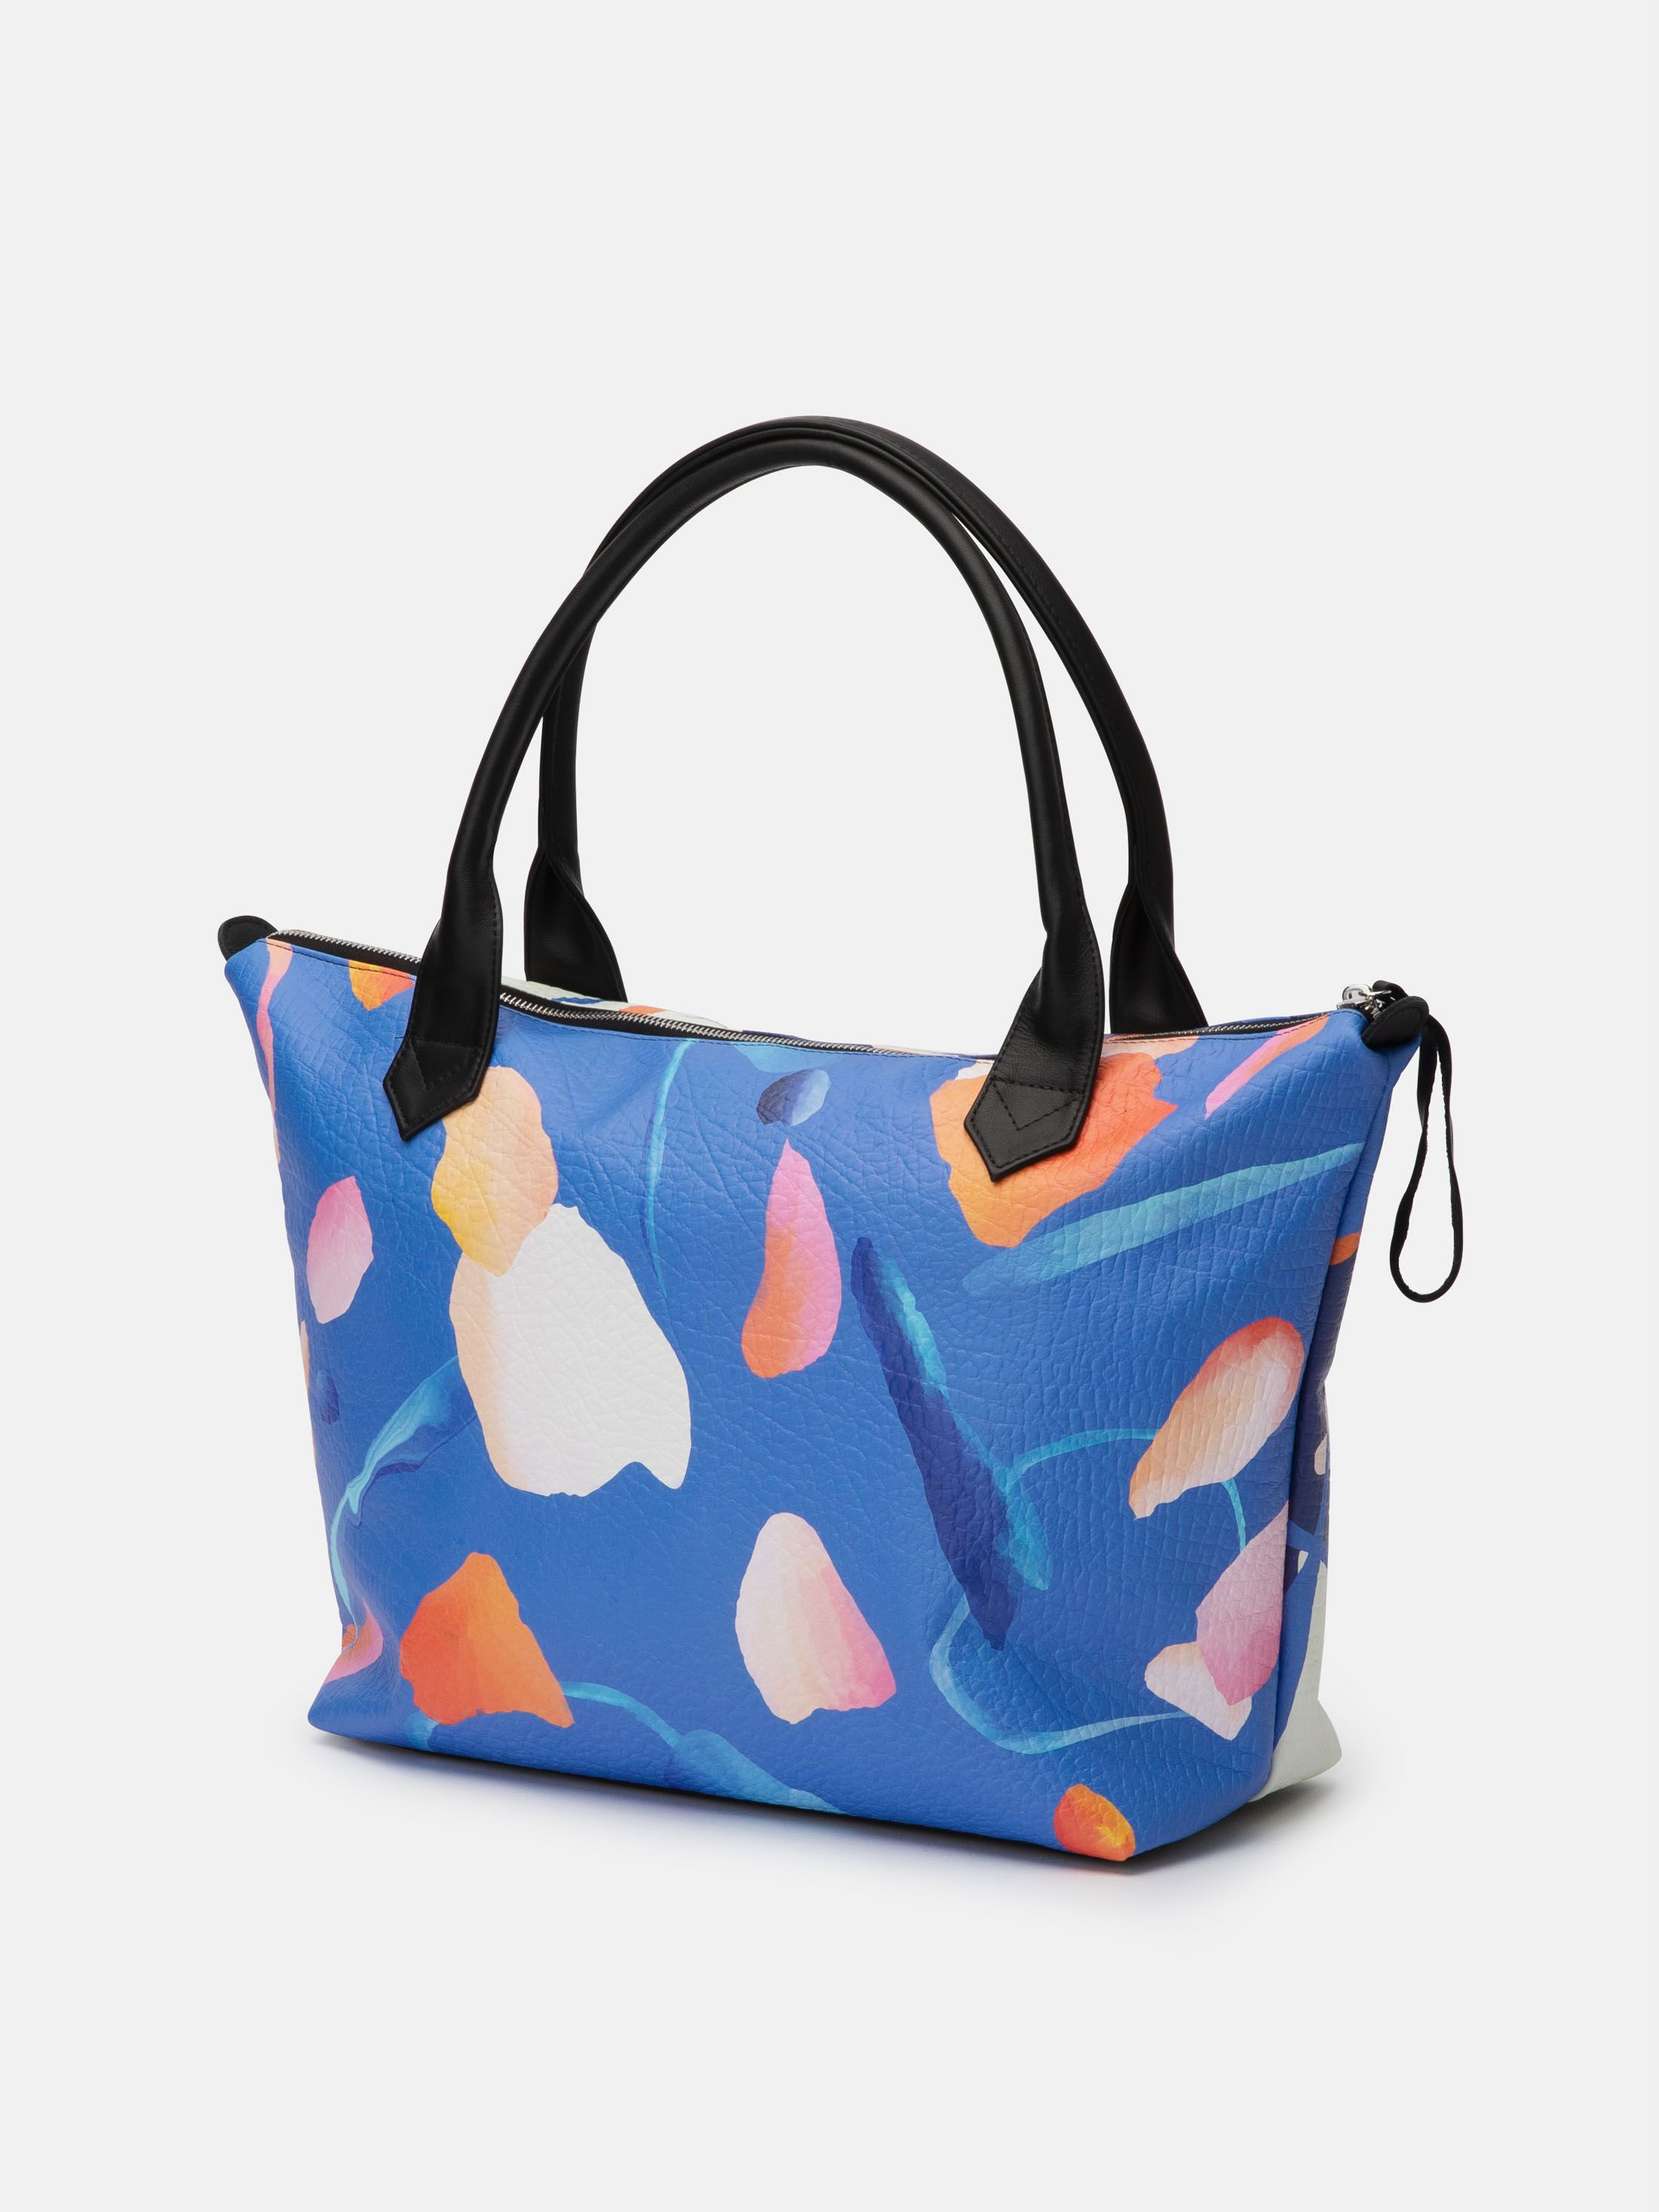 Printed leather Tote Bags details